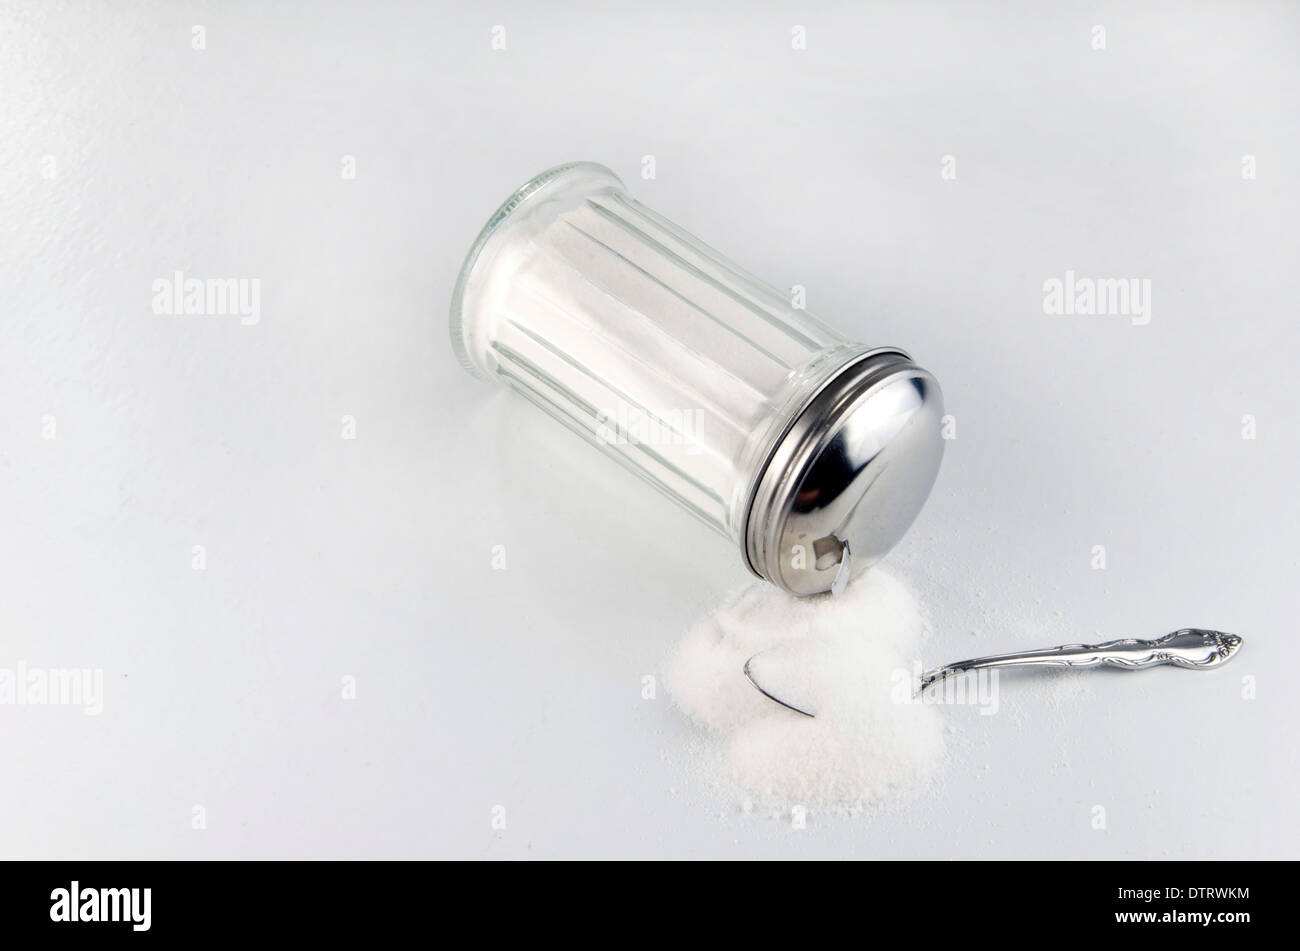 Sugar addiction. Tipped over sugar shaker or container spilling sugar onto spoon. Stock Photo